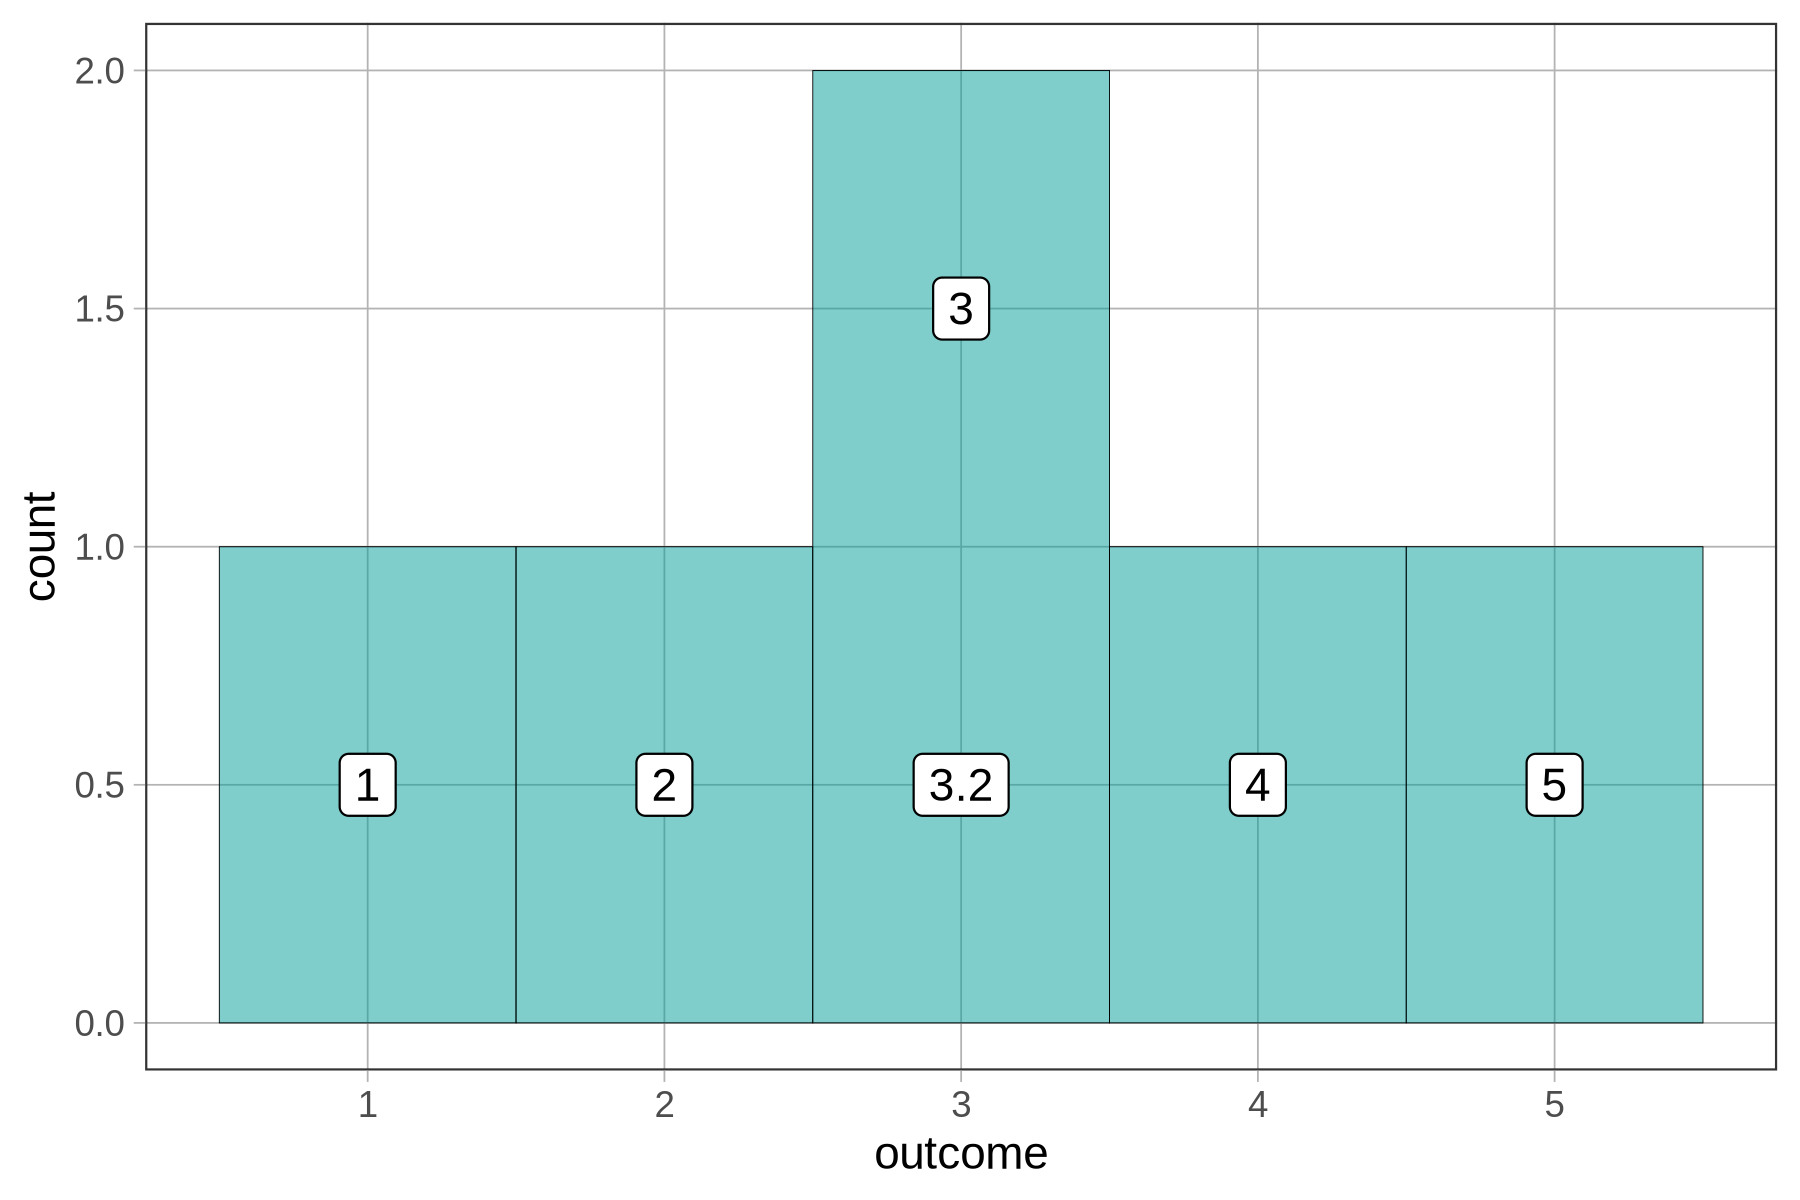 Histogram annotated with the values of outcome: 1, 2, 3, 3.2, 4,5